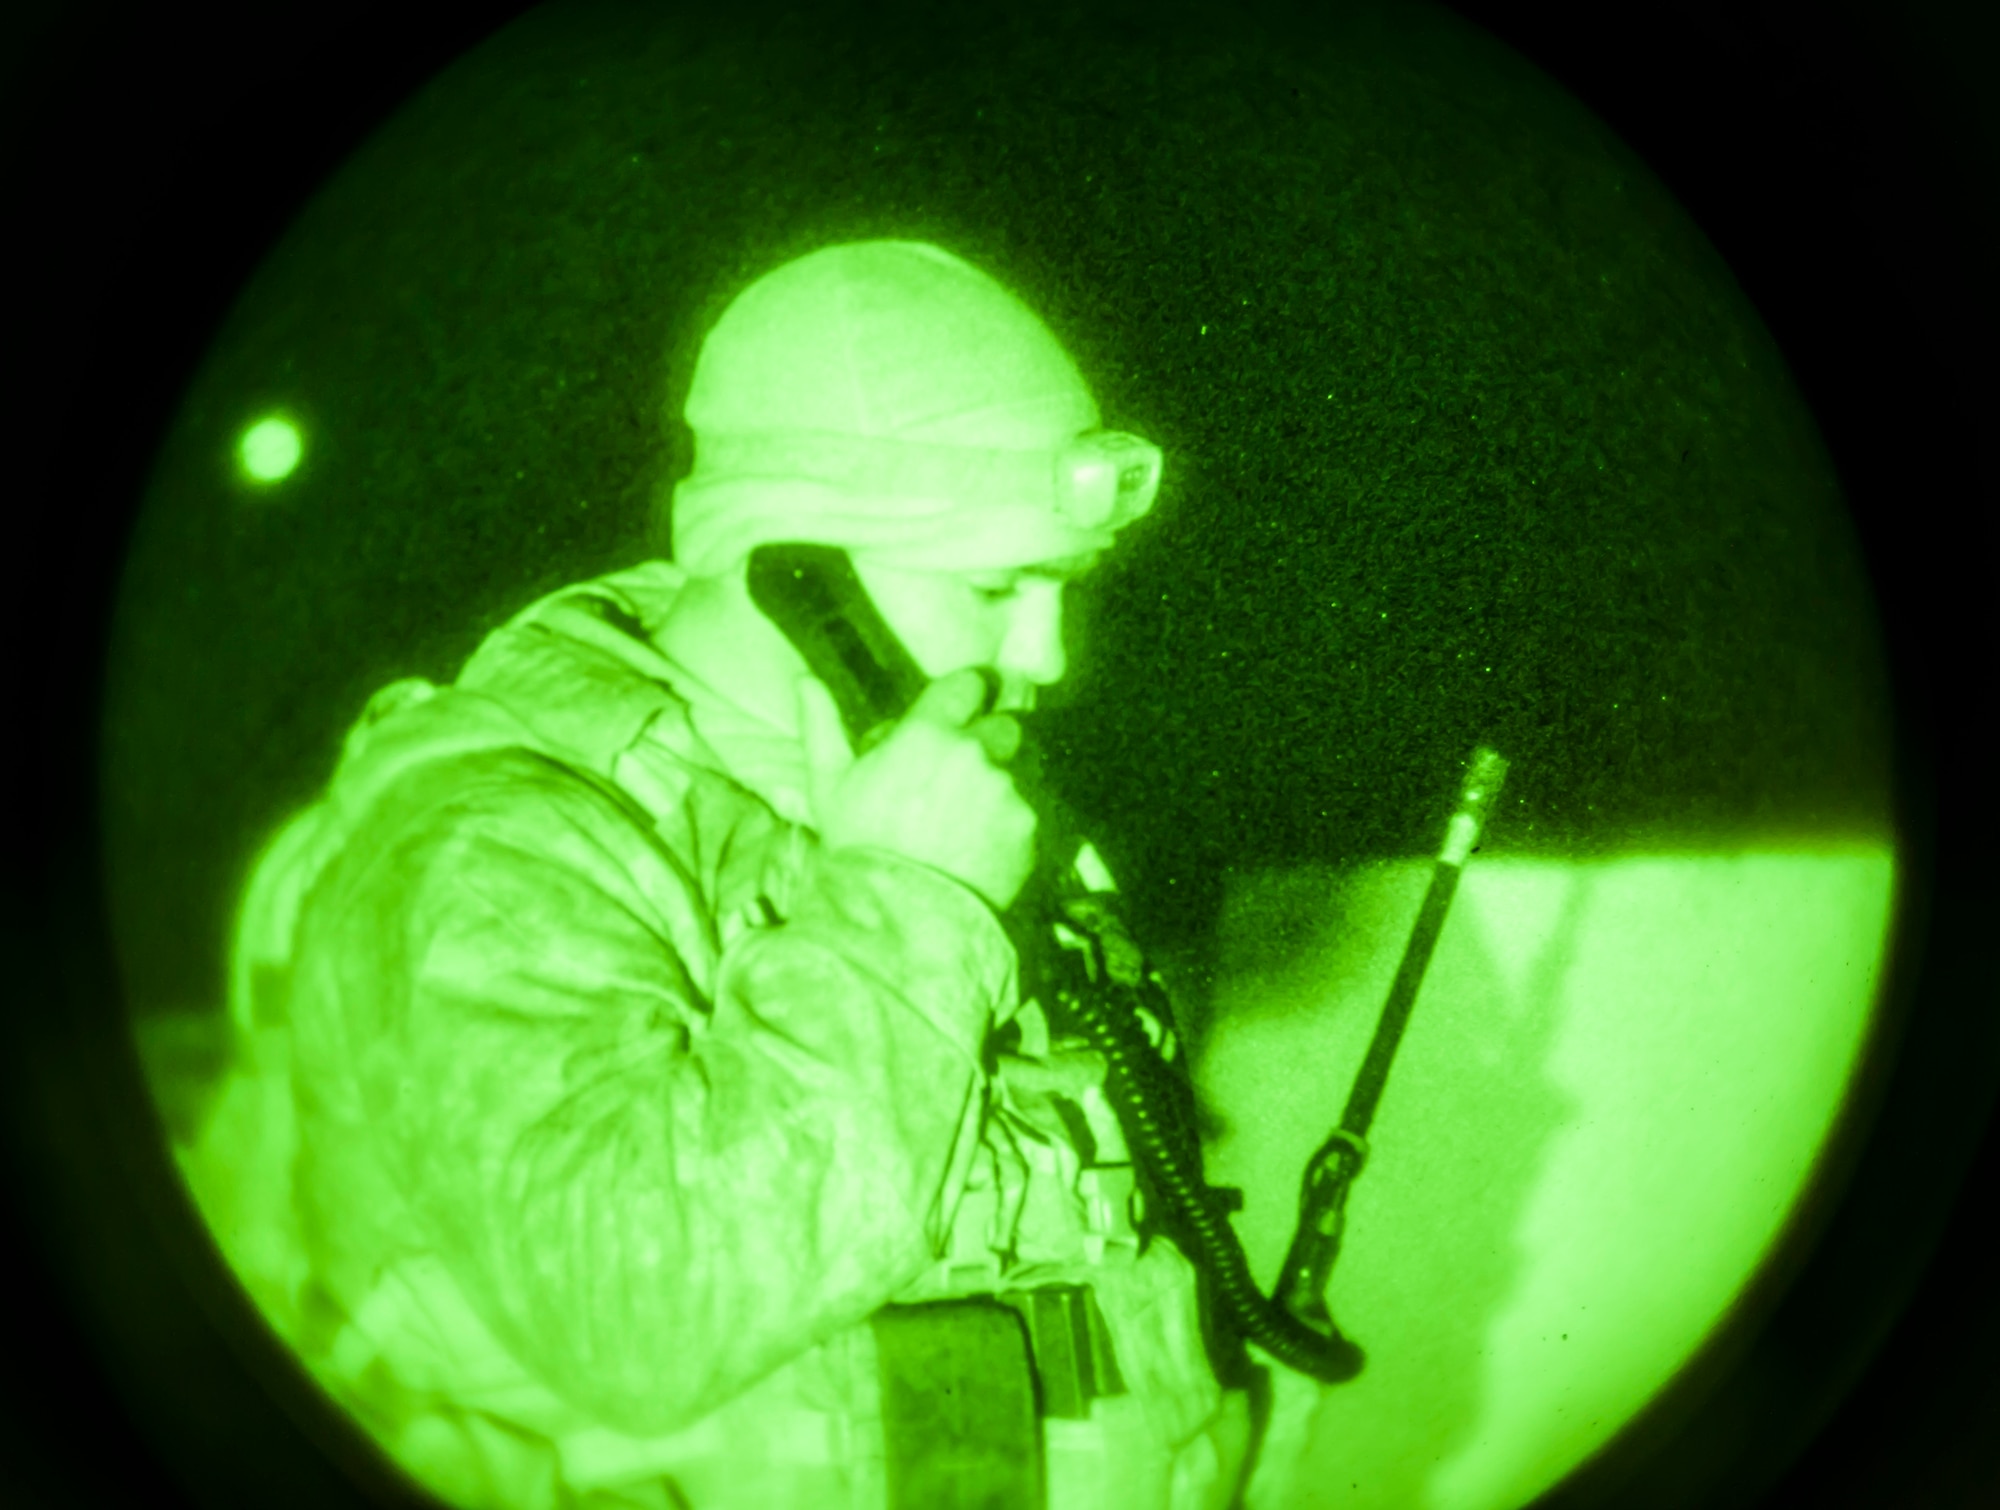 U.S. Marine Capt. Erich Lloyd, 1st Air Naval Gunfire Liaison Company joint terminal attack controller, works a close-air support late night mission during exercise Mountain Roundup 2013 at Mountain Home Air Force Base, Idaho, Oct. 2, 2013. The ANGLICO Marines are scheduled to deploy later next year. (U.S. Air Force photo by Master Sgt. Kevin Wallace/RELEASED)